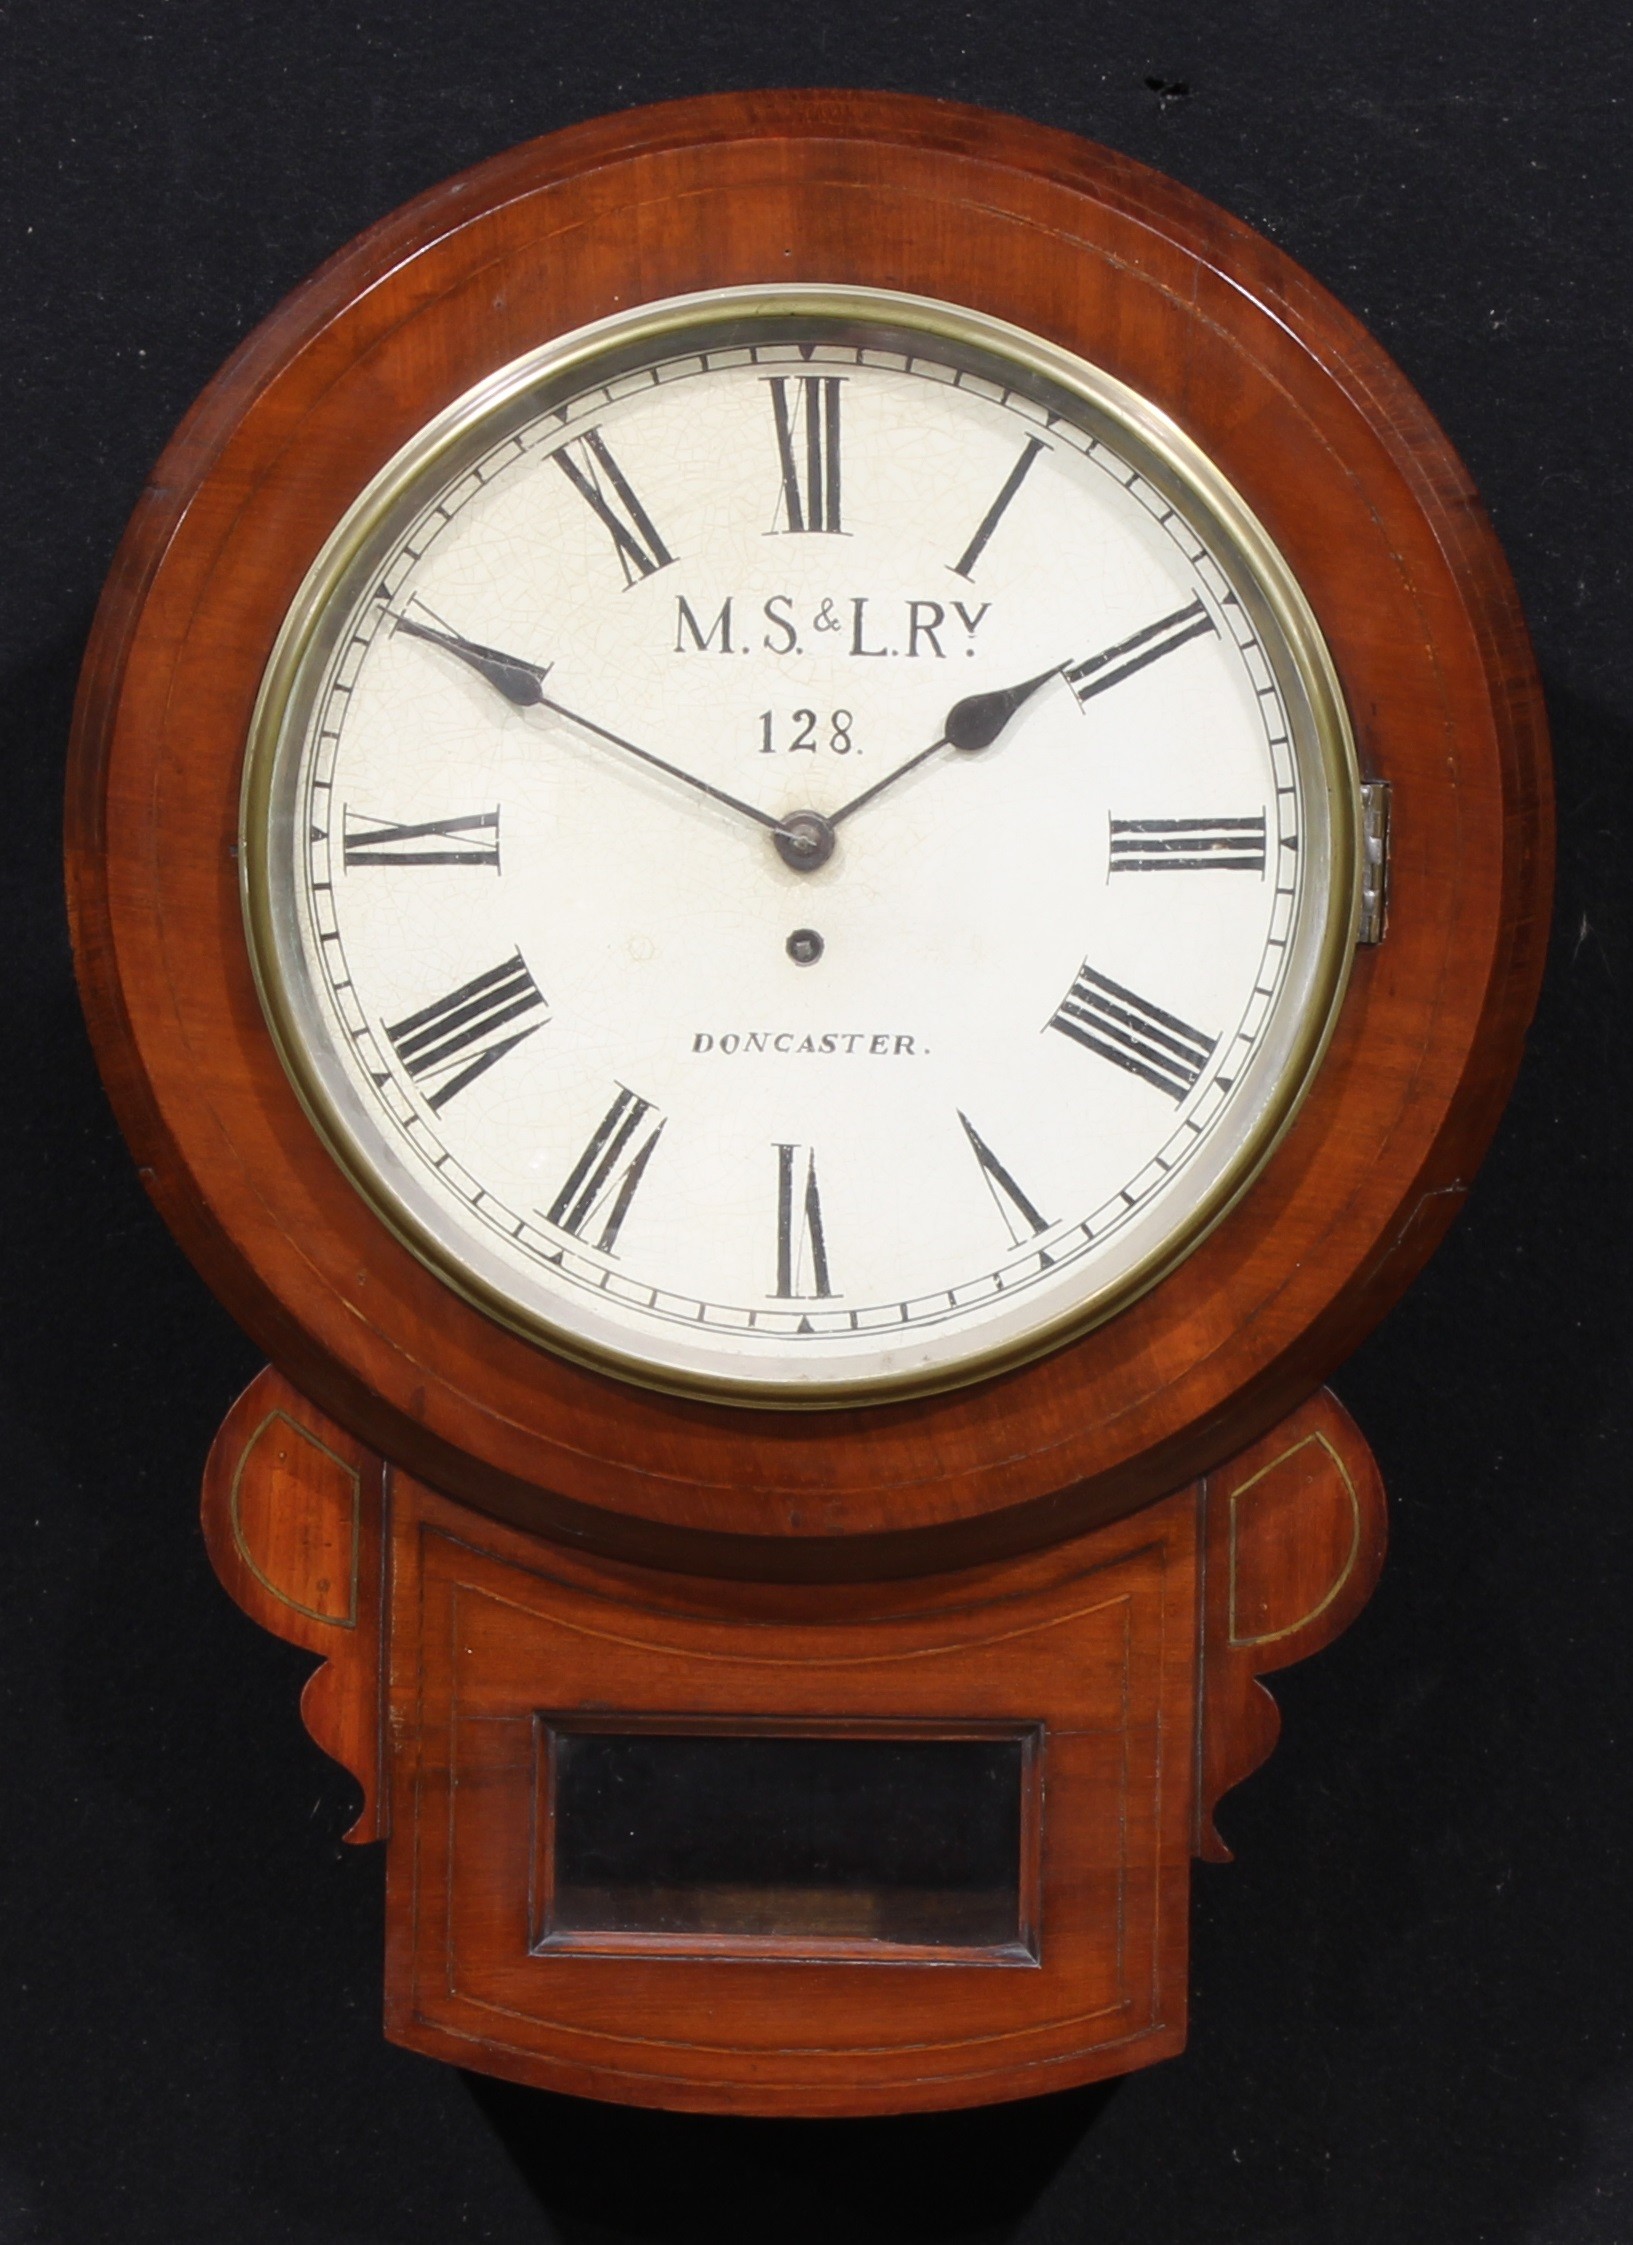 A late 19th century drop dial fusee railway timepiece, 30.5cm circular clock dial inscribed M.S.&L.R